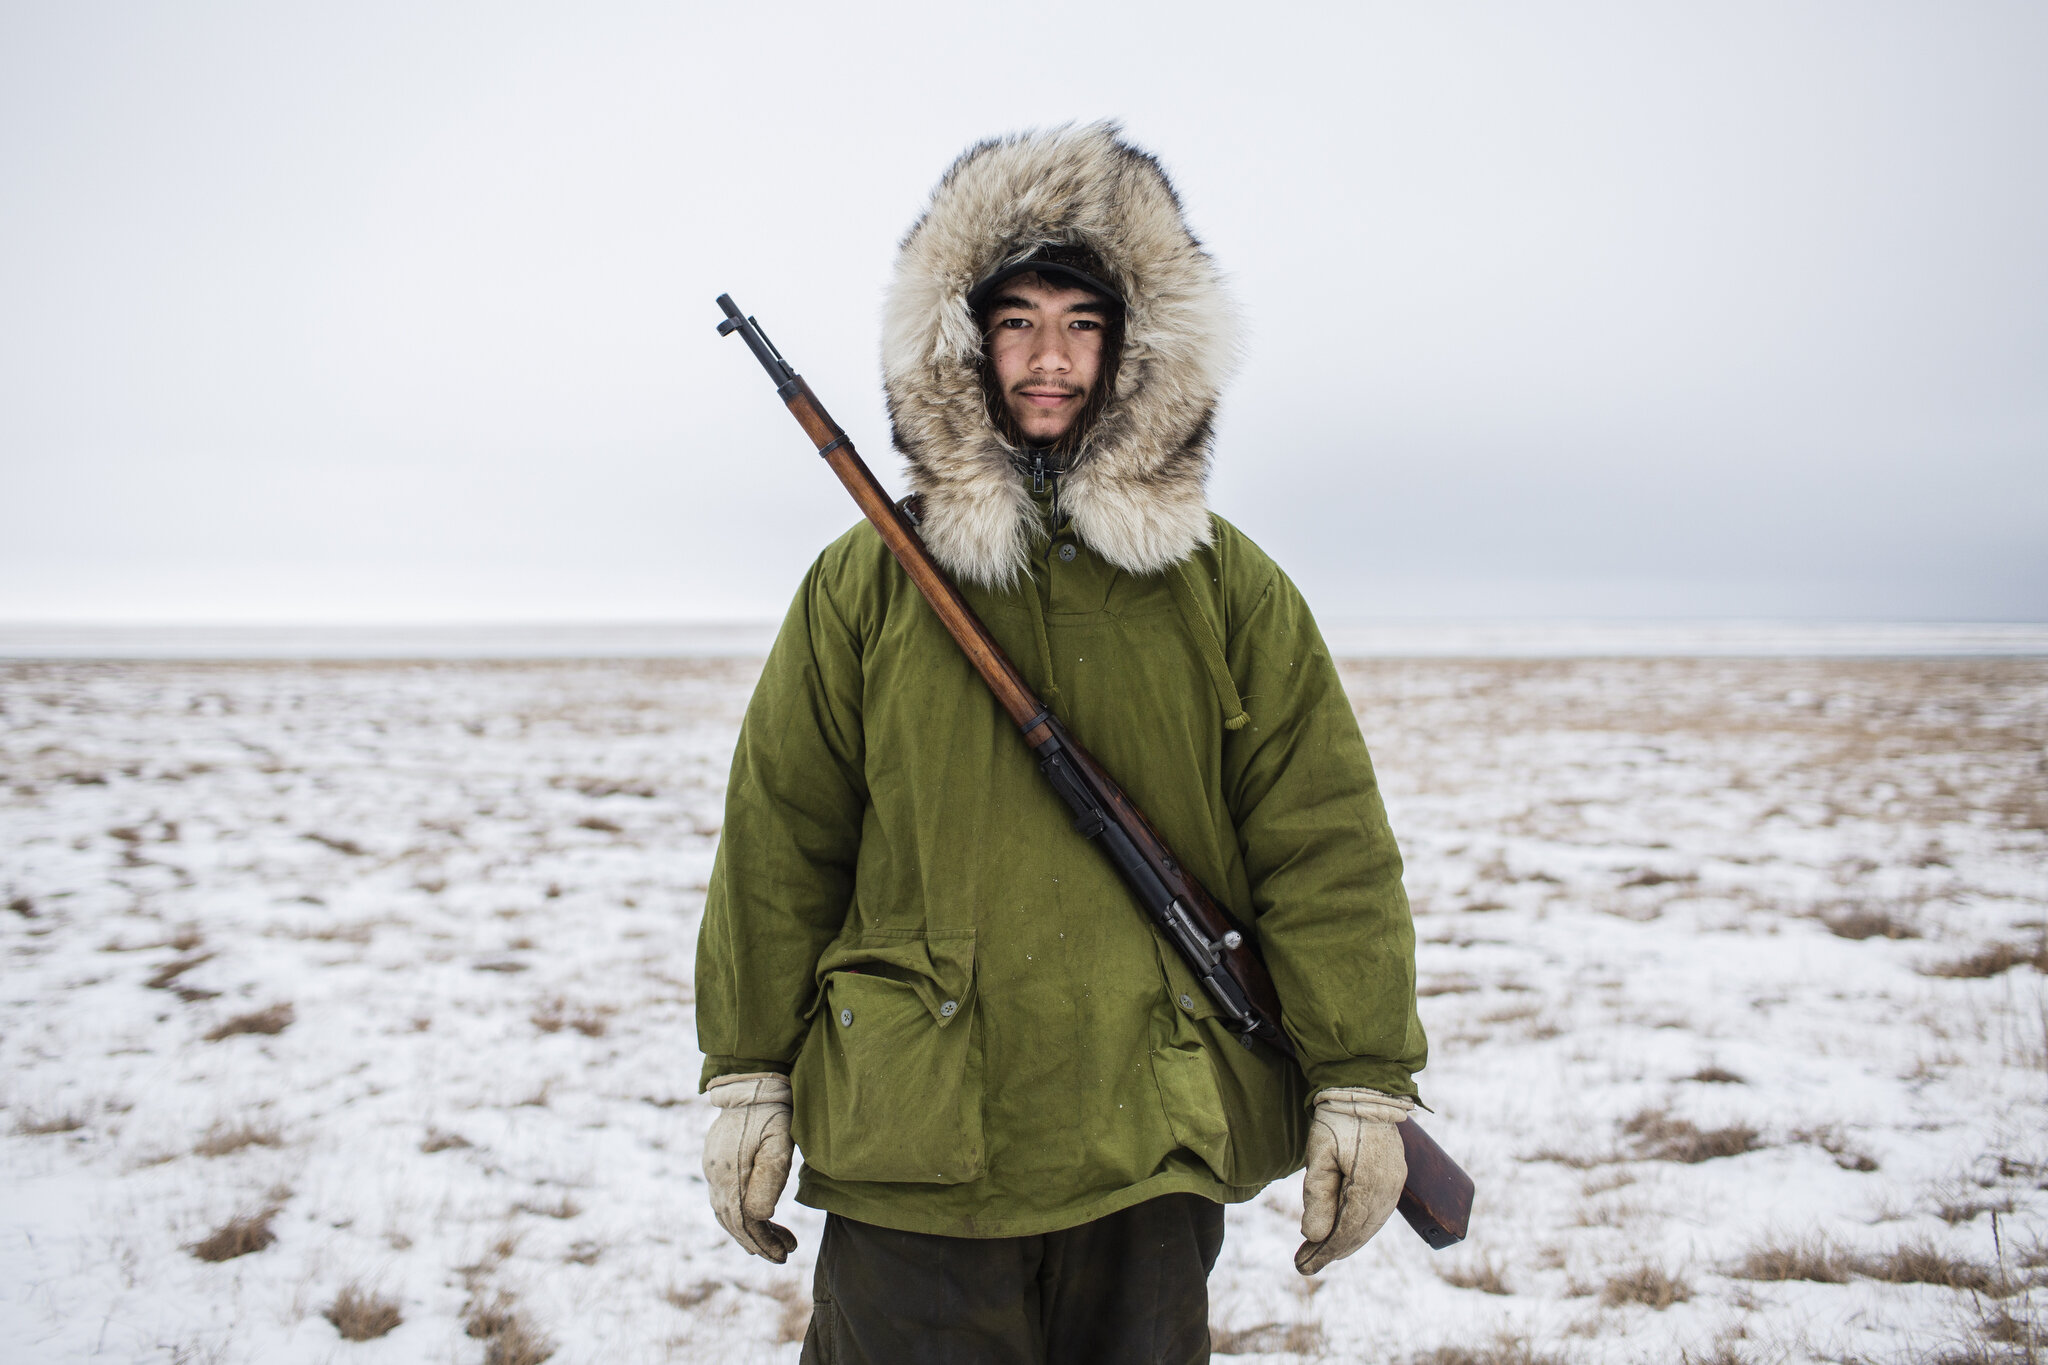  Vebjørn Aishana Reitan prepares to hunt caribou in Kaktovik, Alaska, an Iñupiat village on the coast of the Beaufort Sea located within the Arctic Wildlife Refuge. October 18th, 2015. The Refuge is currently in danger of being opened up to gas and o